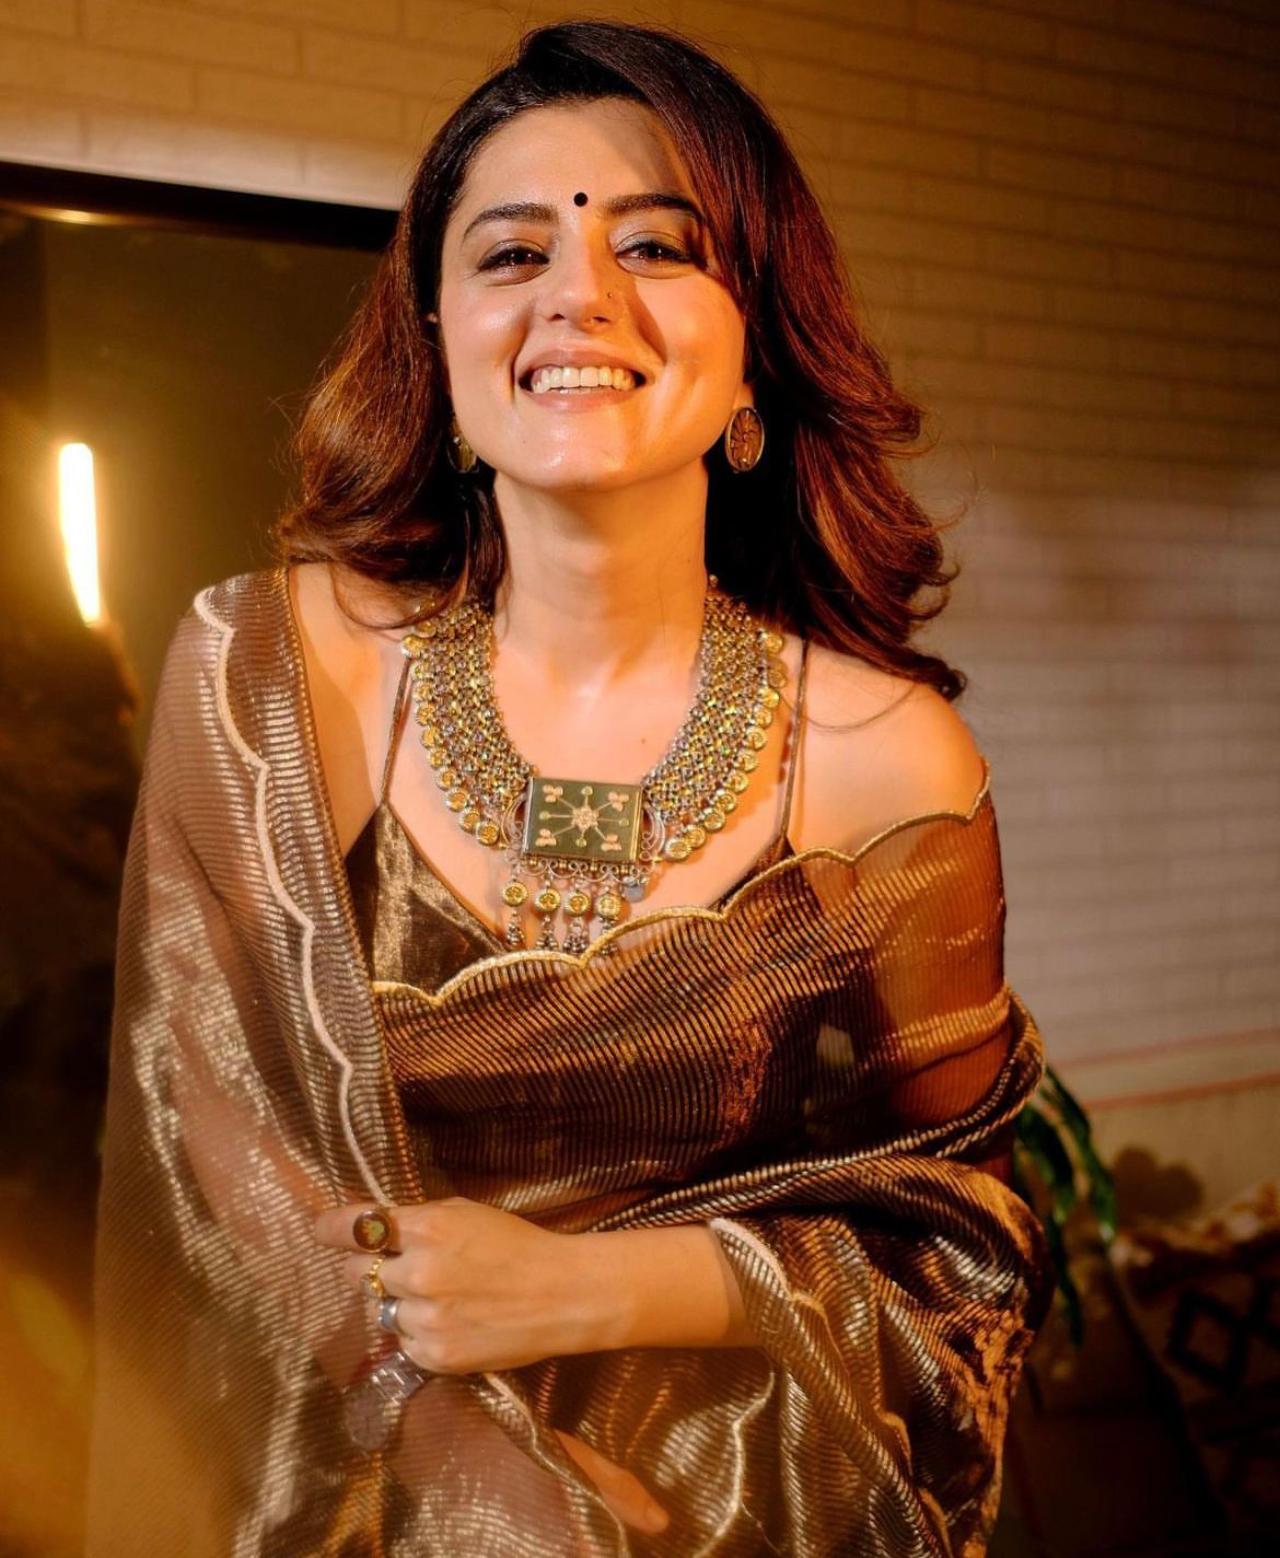 Gold Zari Saree
A Zari saree is a must in any wardrobe, Riddhi is seen wearing a golden zari saree with Gold oxidised heavy statement neck piece. And a black bindi to finish the look